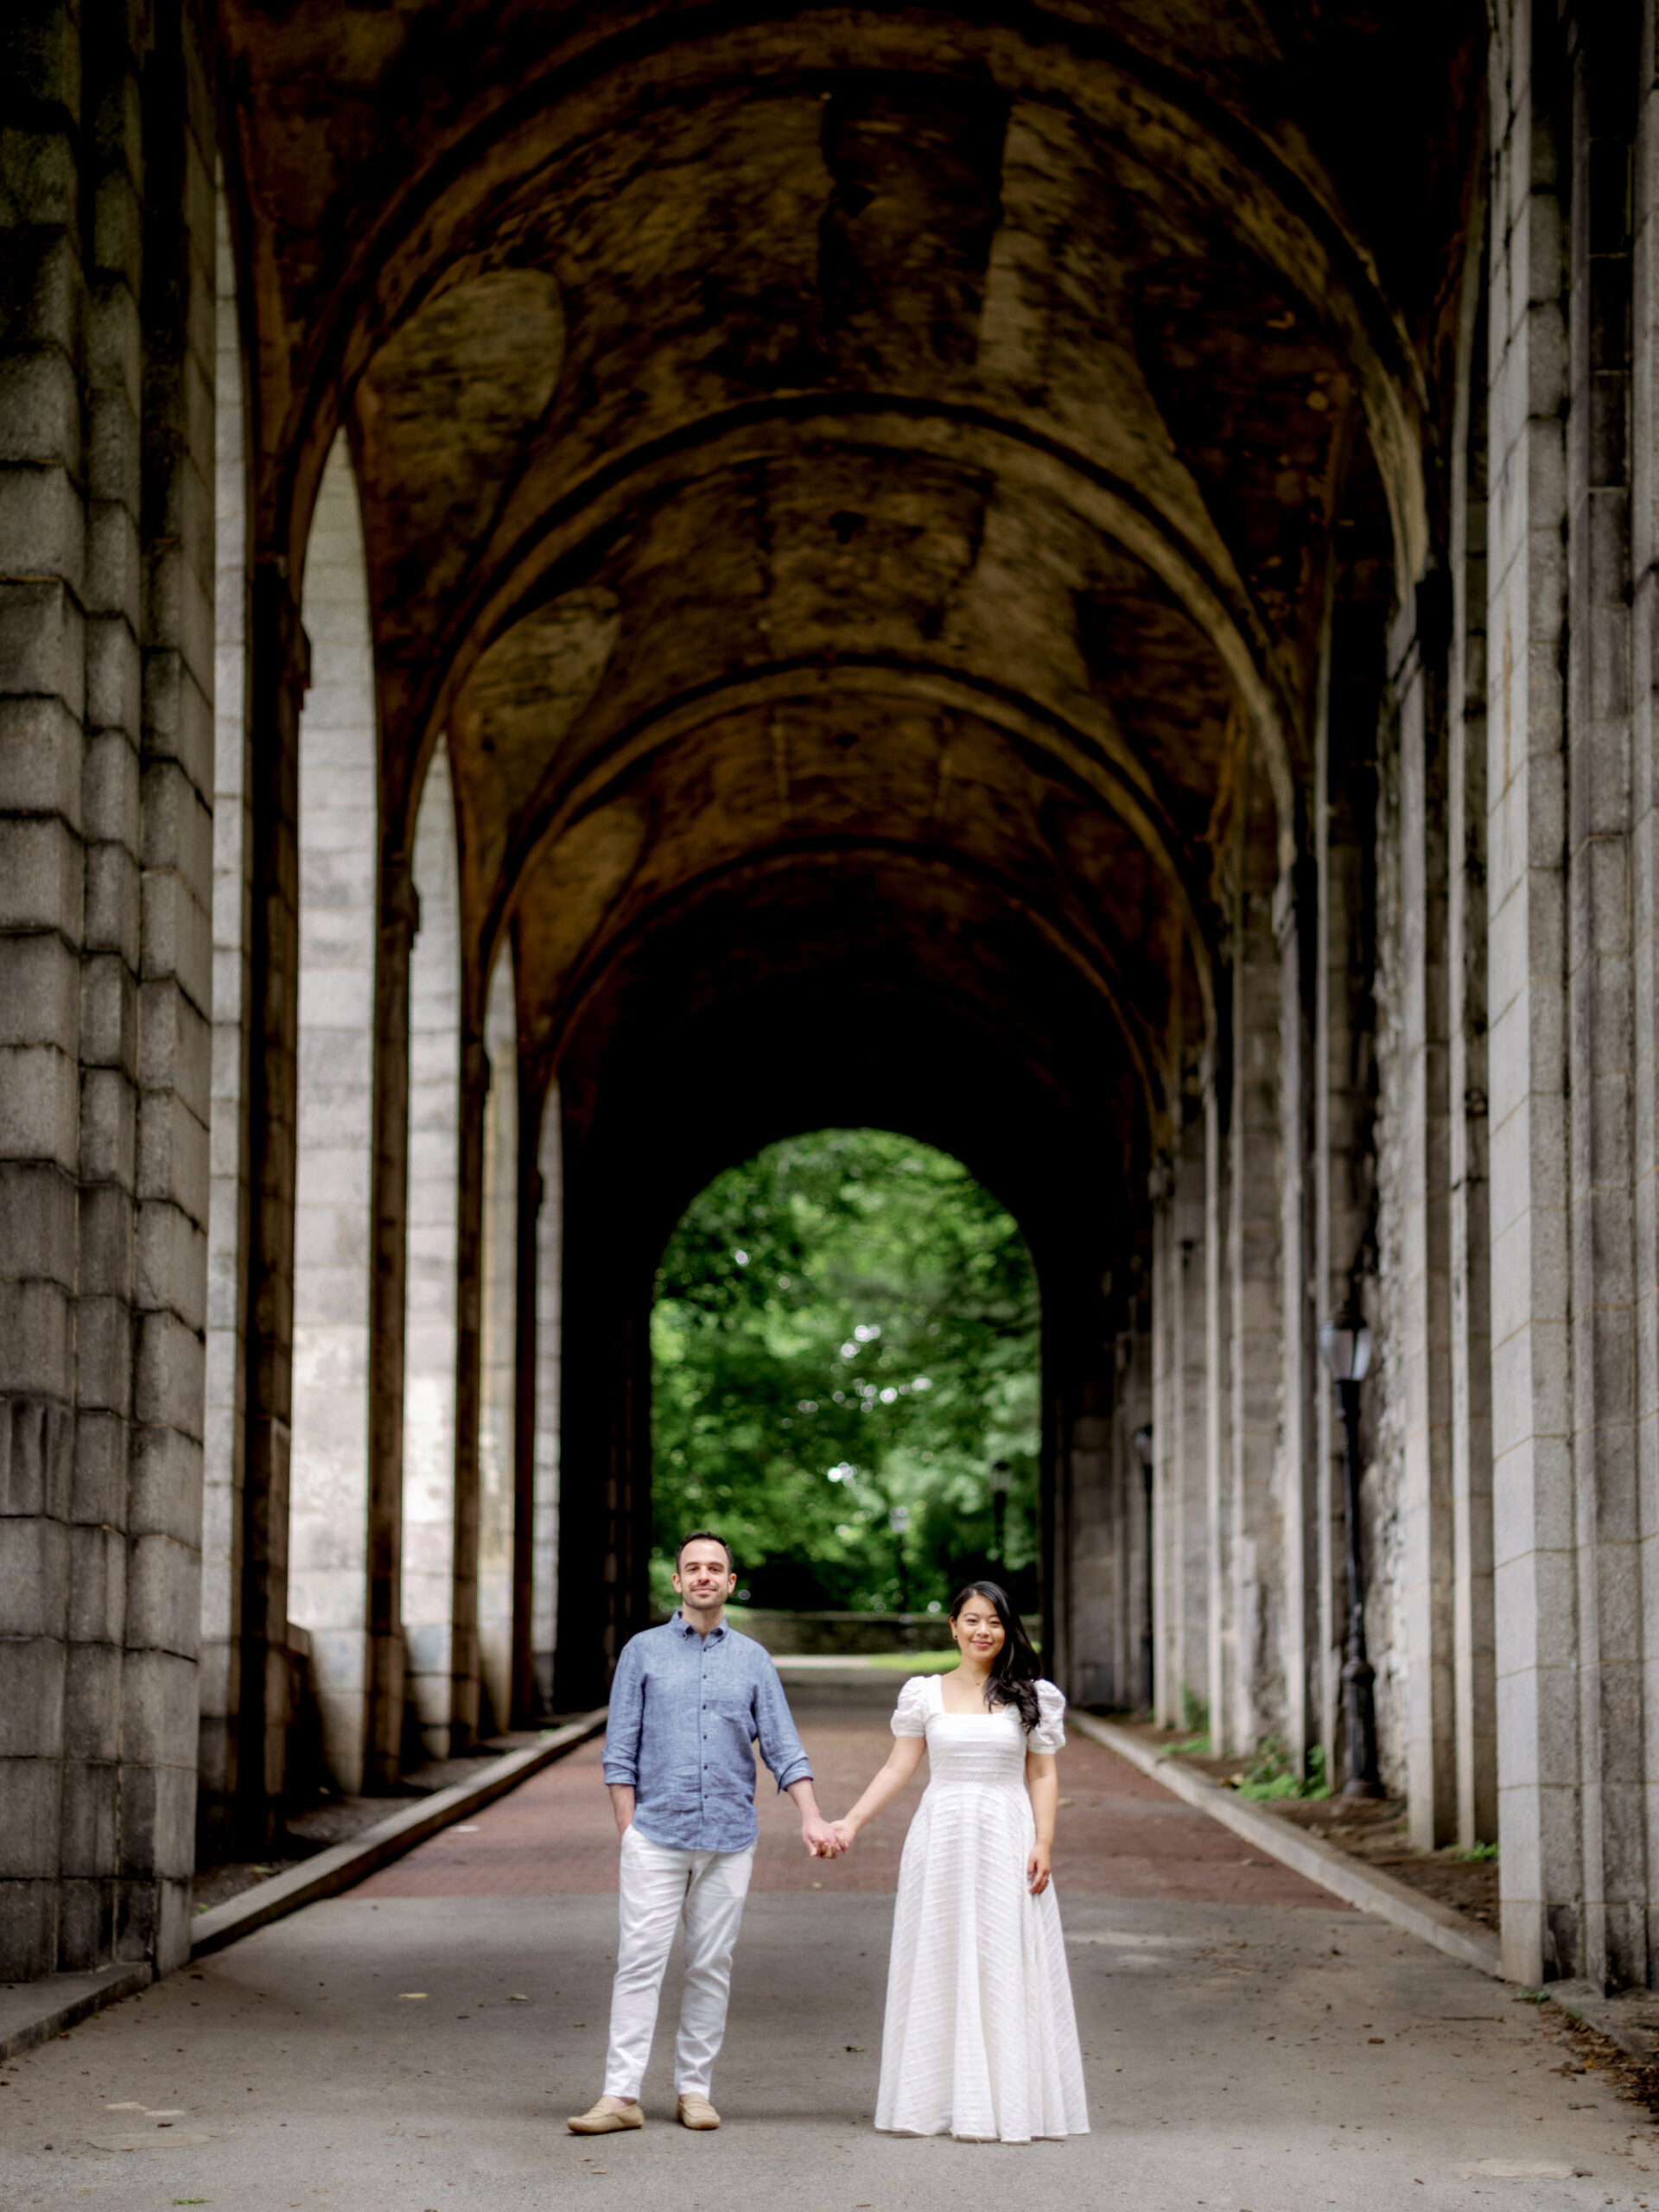 The engaged couple are standing side-by-side while holding hands with an old NYC building in the background. Engagement photos image by Jenny Fu Studio